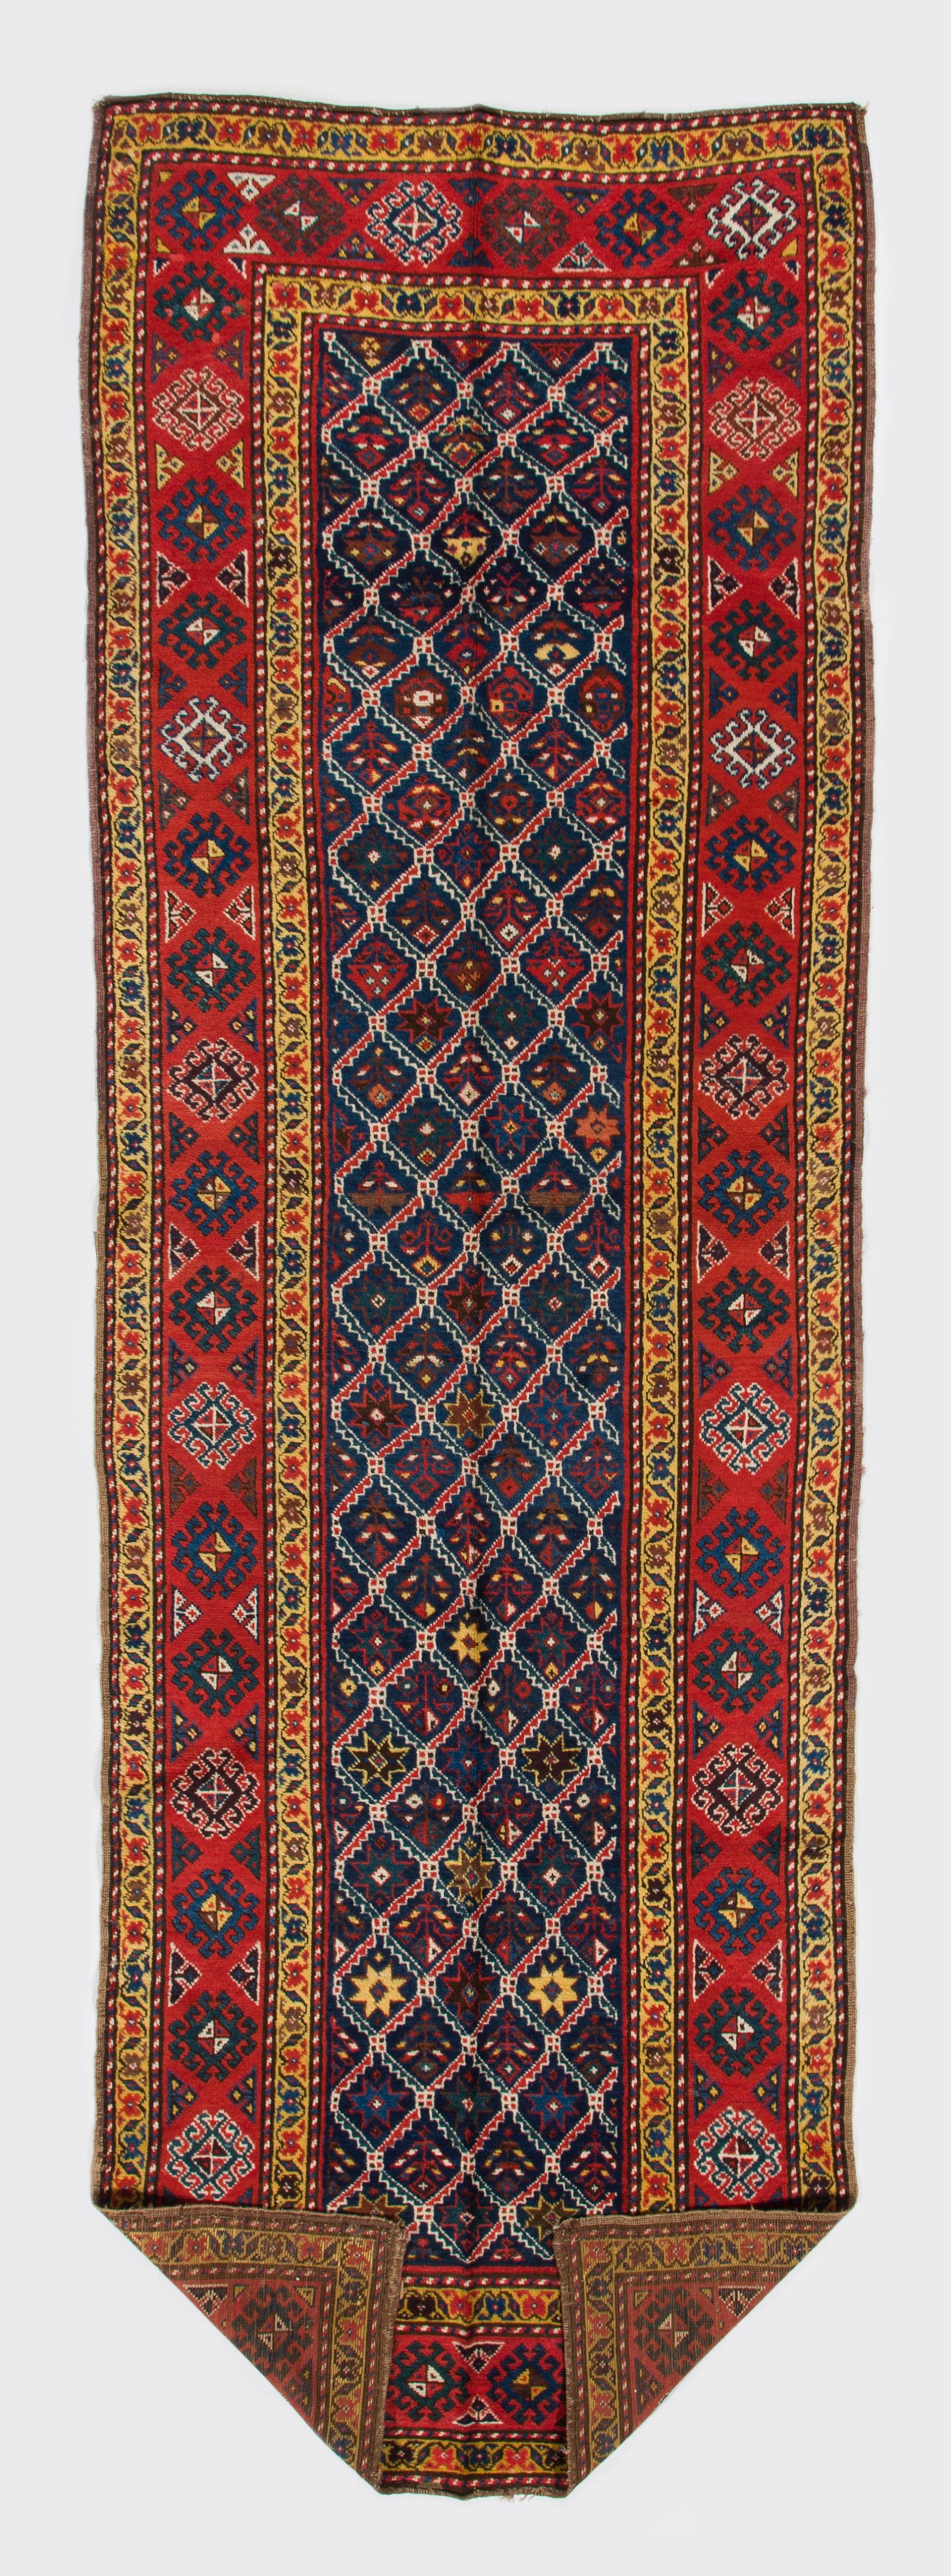 An antique Caucasian Talish runner rug. Finely hand-knotted with even medium wool pile on wool foundation. Excellent condition. Sturdy and as clean as a brand new rug (deep washed professionally). 
Size: 3.7 x 11.4 ft.